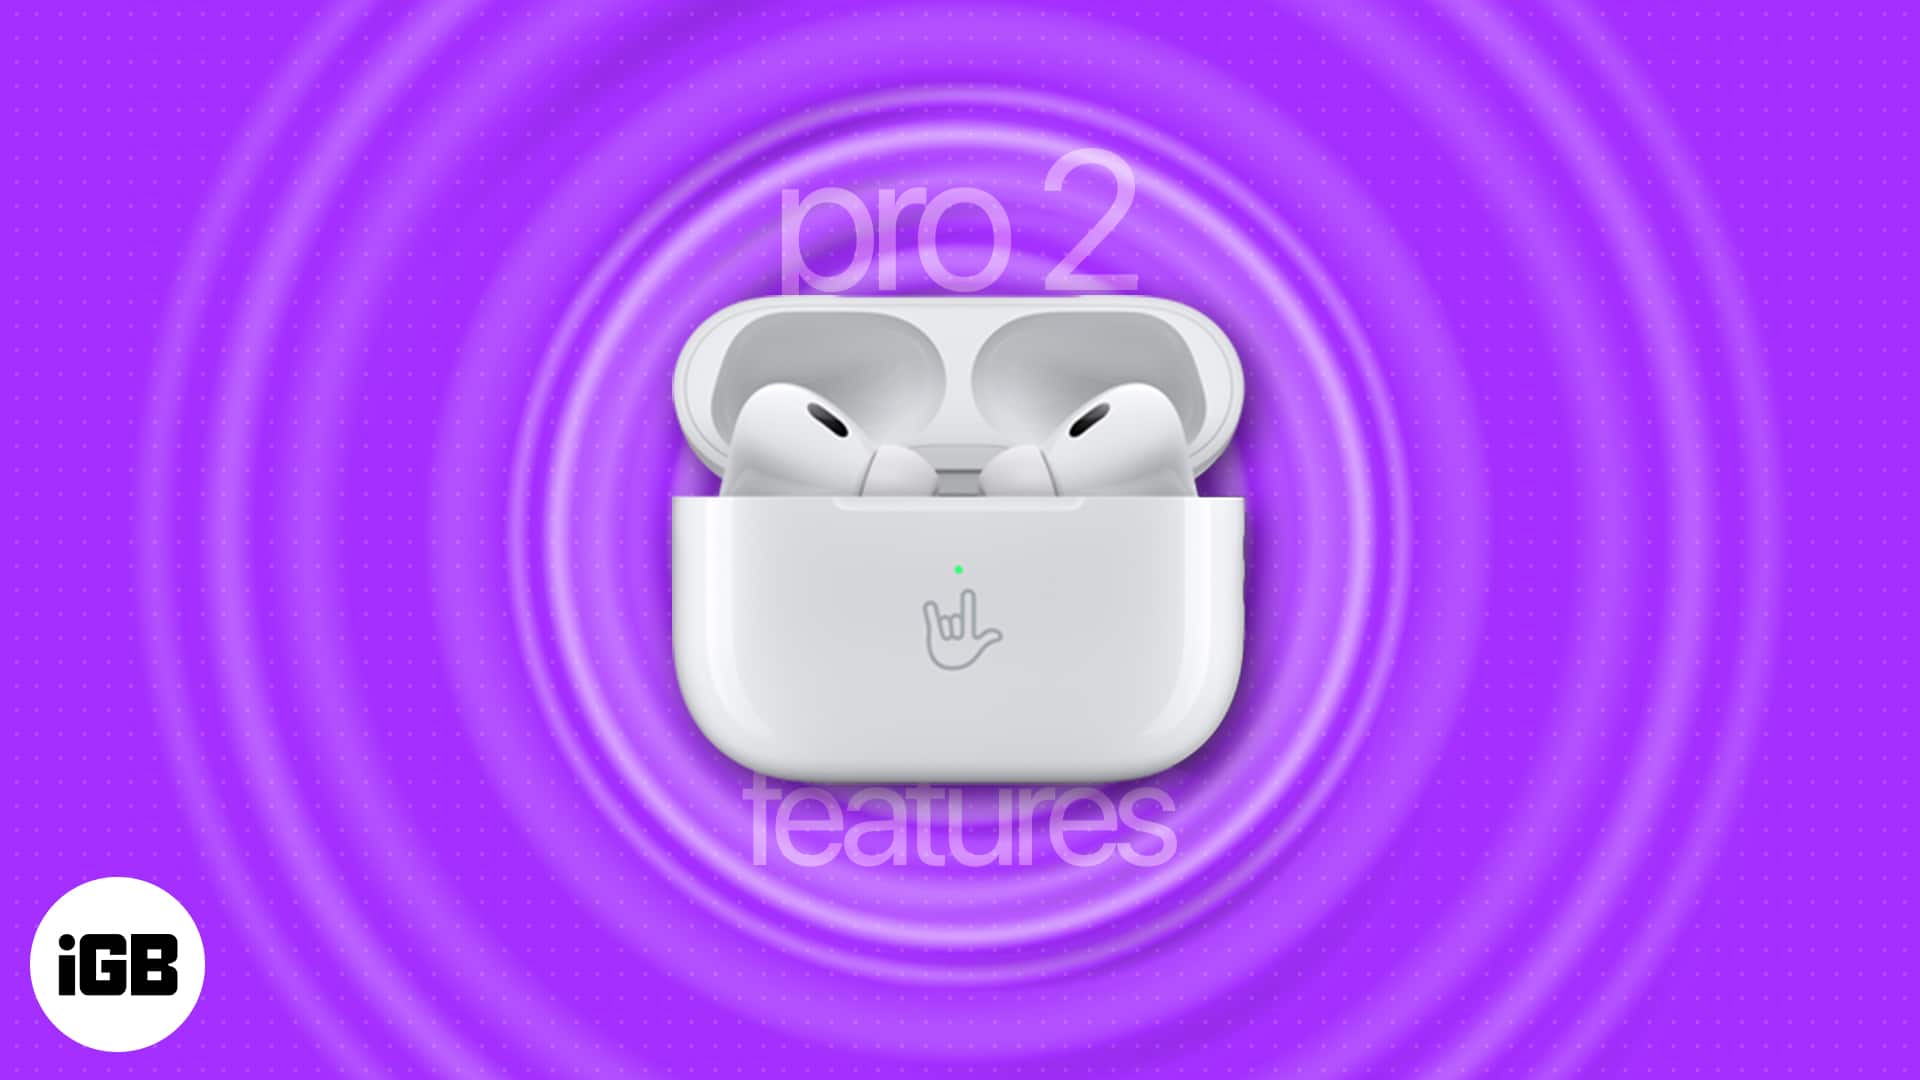 How to use new airpods pro 2 features